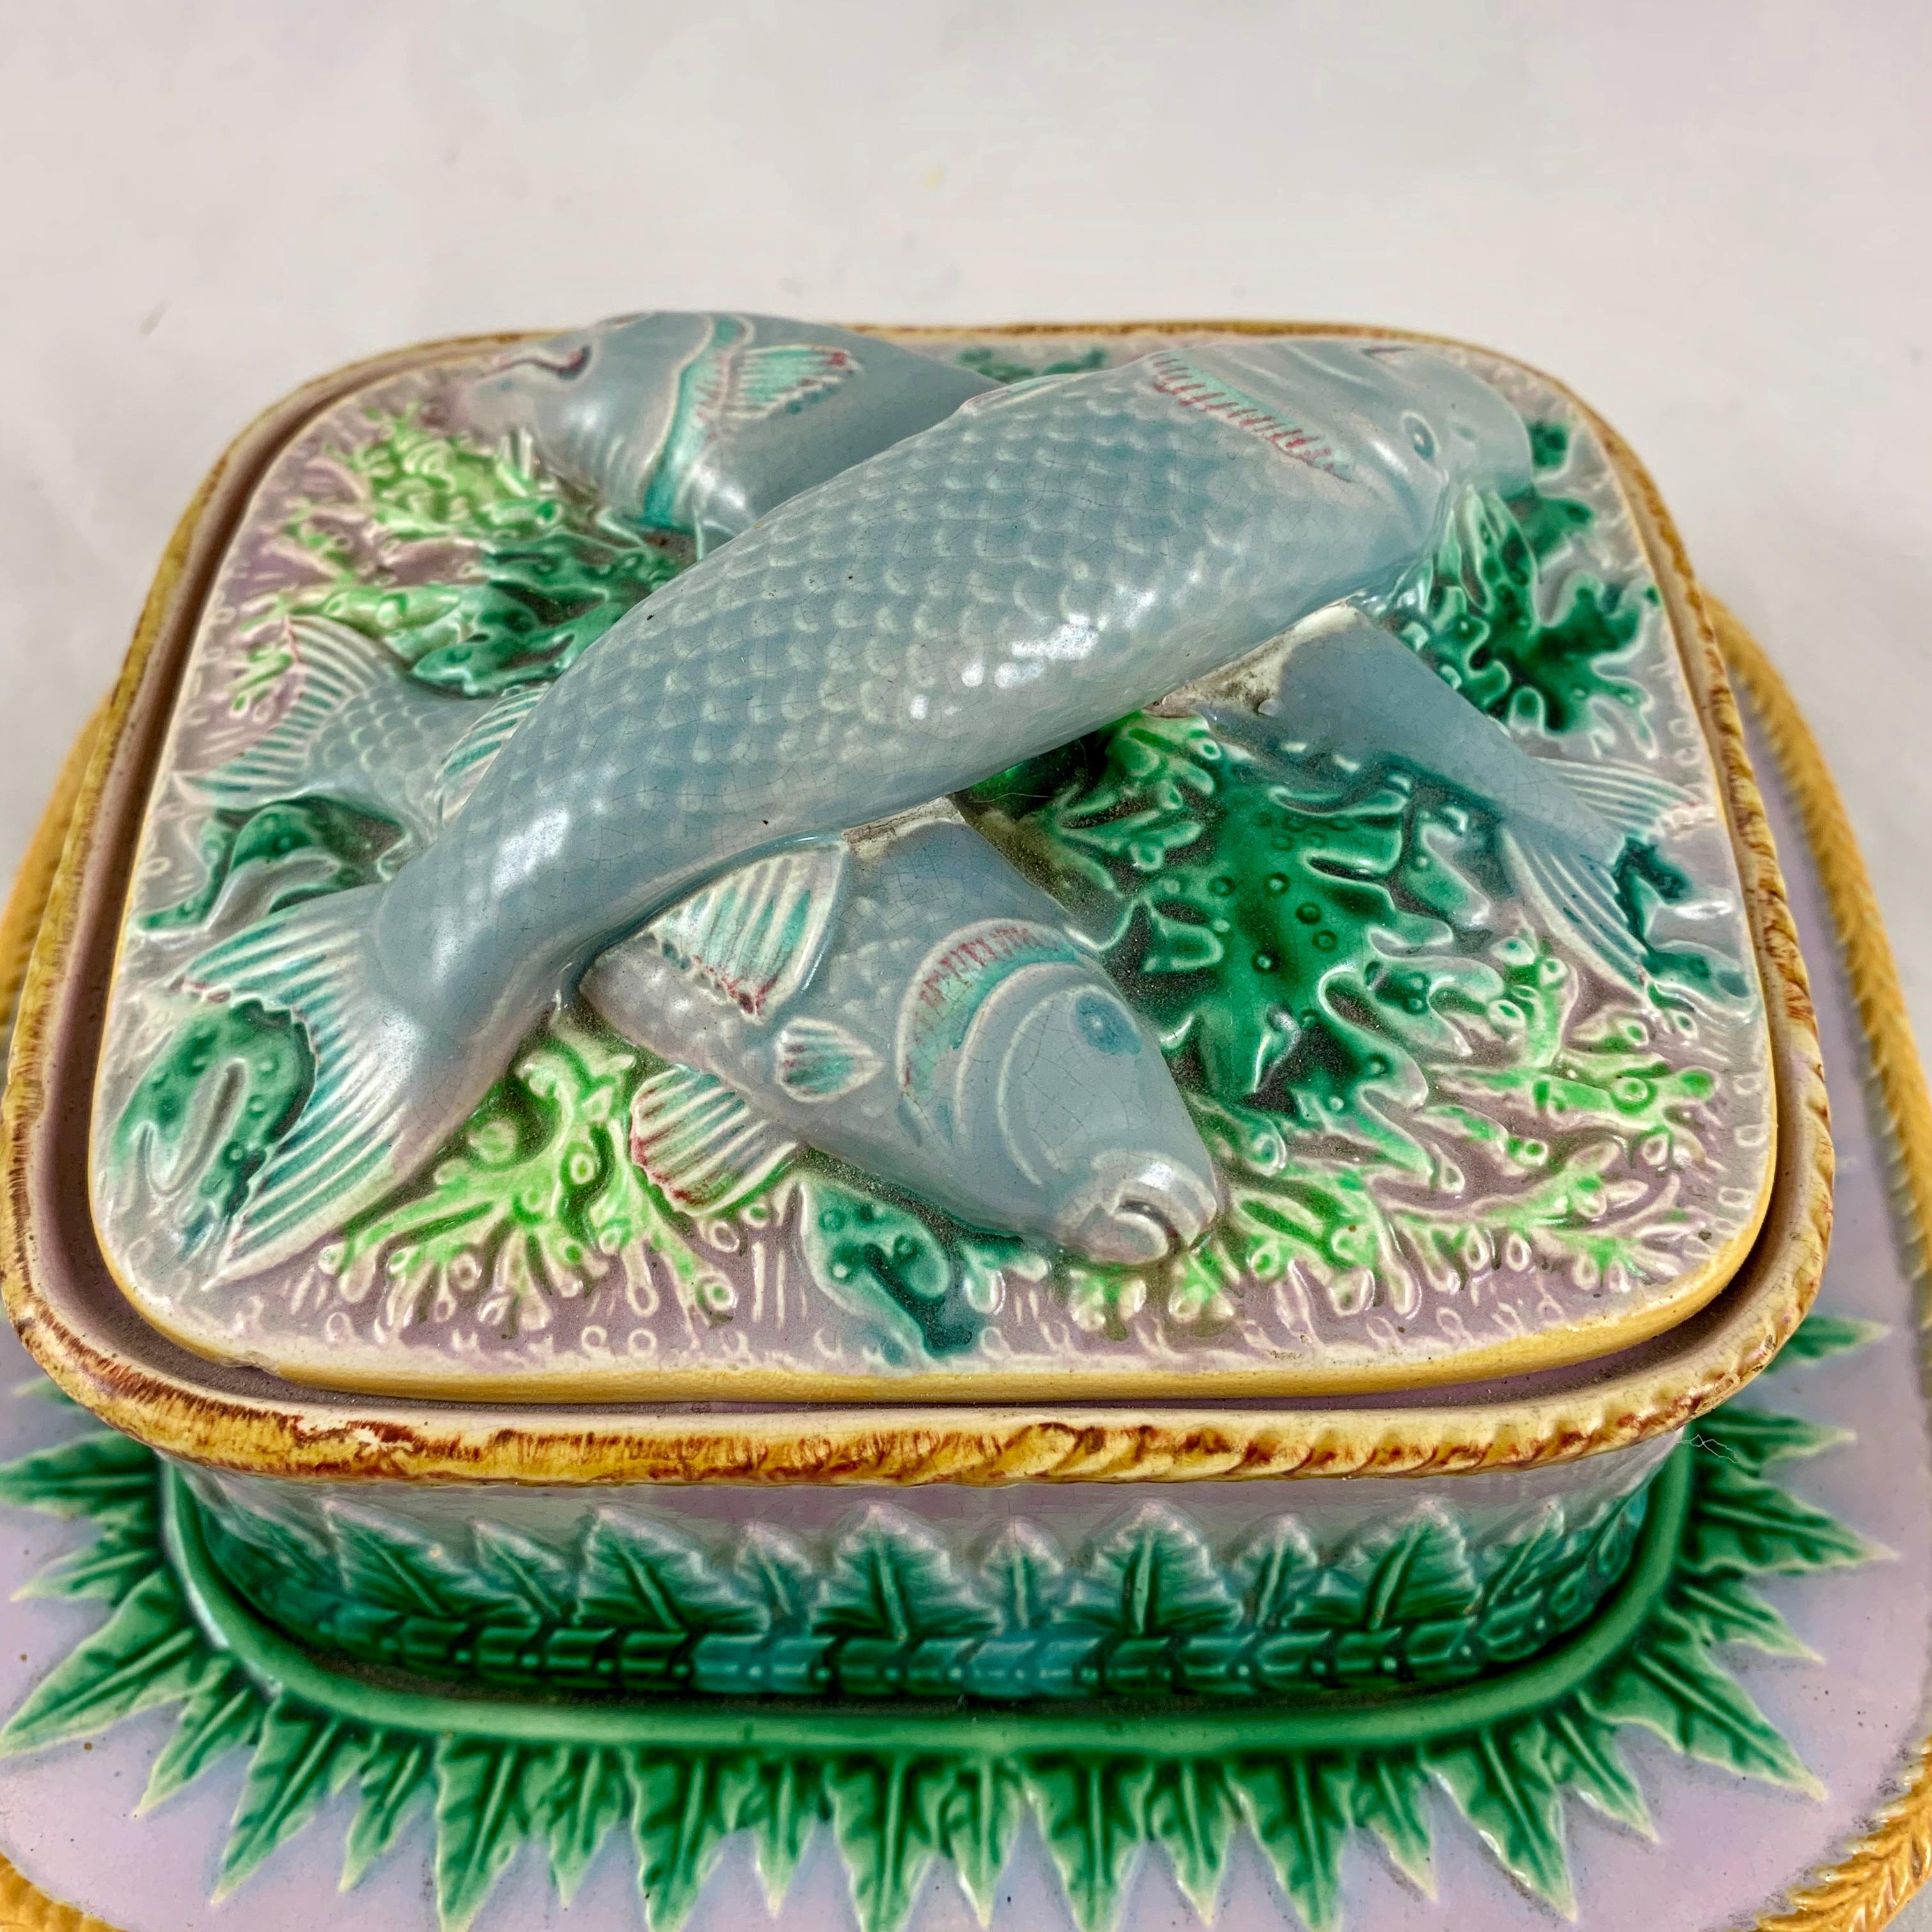 From the Stoke-On-Trent pottery works of George Jones, a spectacular three-piece Majolica sardine box, Staffordshire, England, dated 1870.

In a lovely soft color palette of lilac pink and gray with green acanthus leaves, and a yellow ochre rope